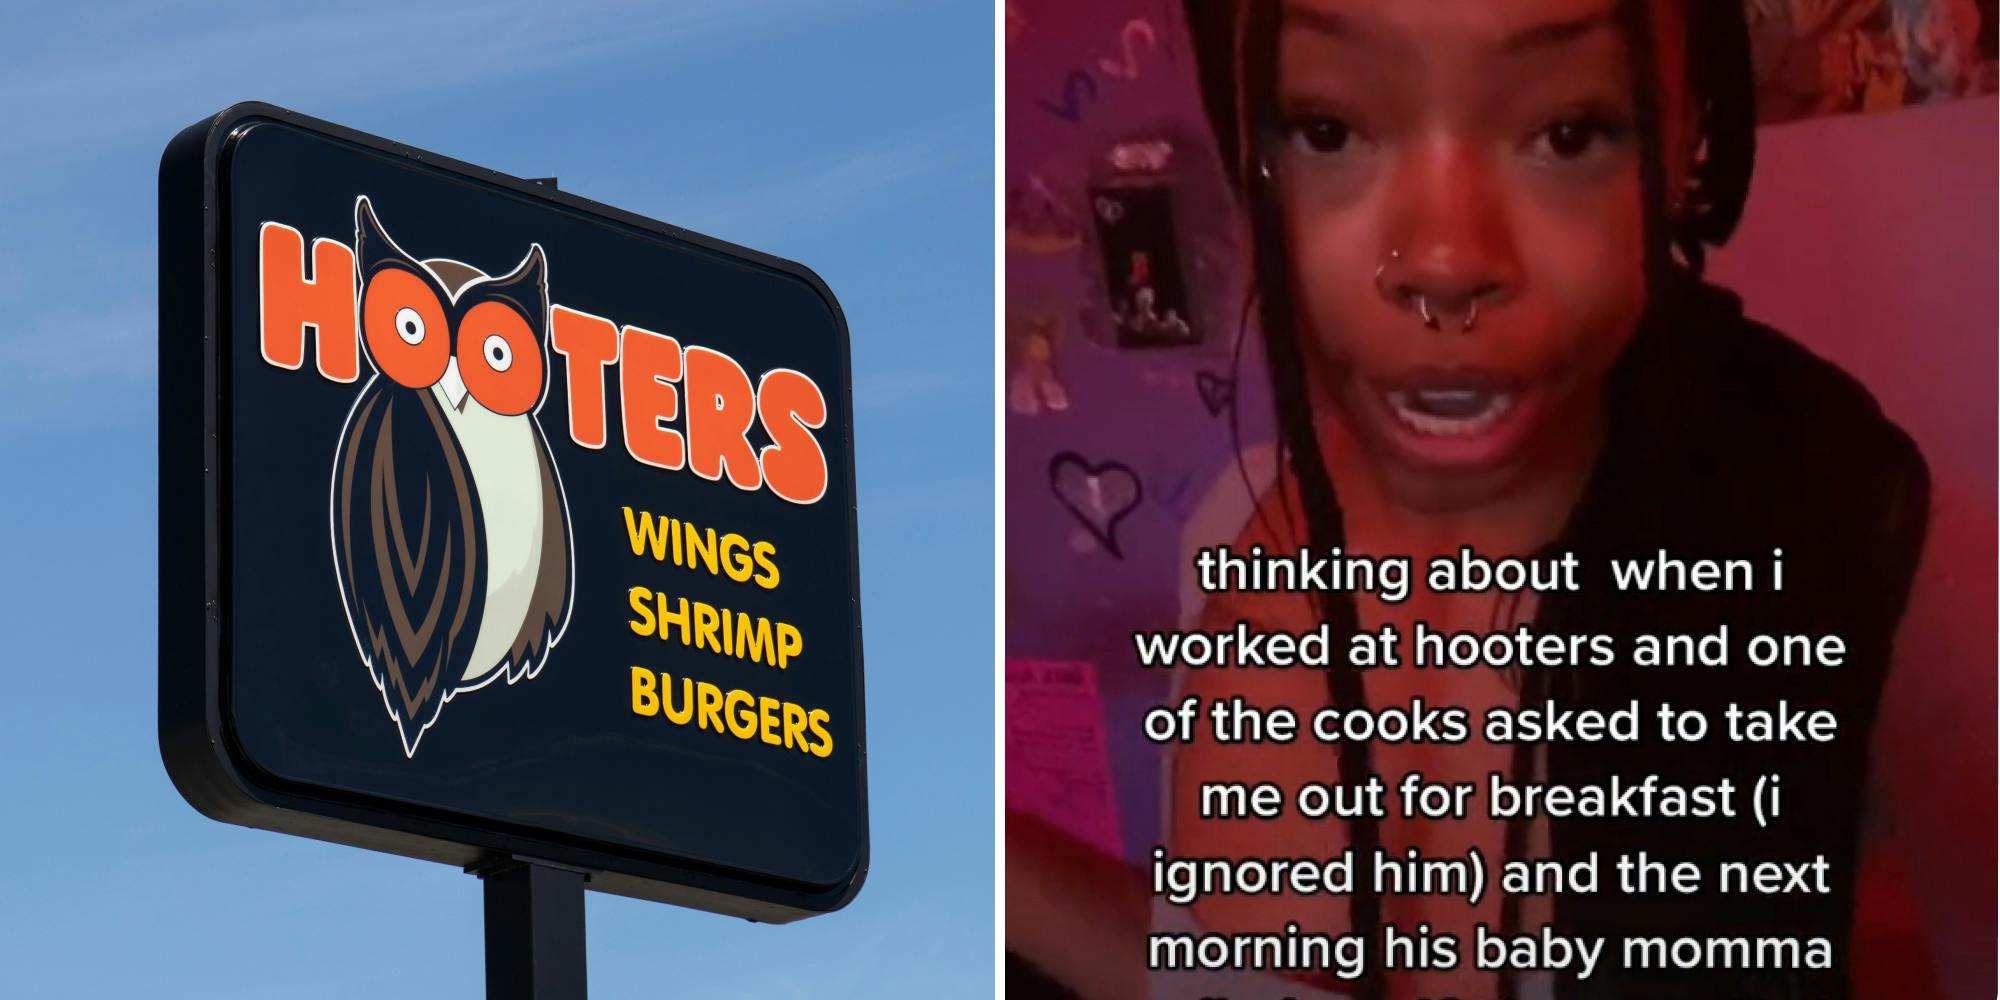 From angry Hooters waitresses to sleeping under a ring - The rise